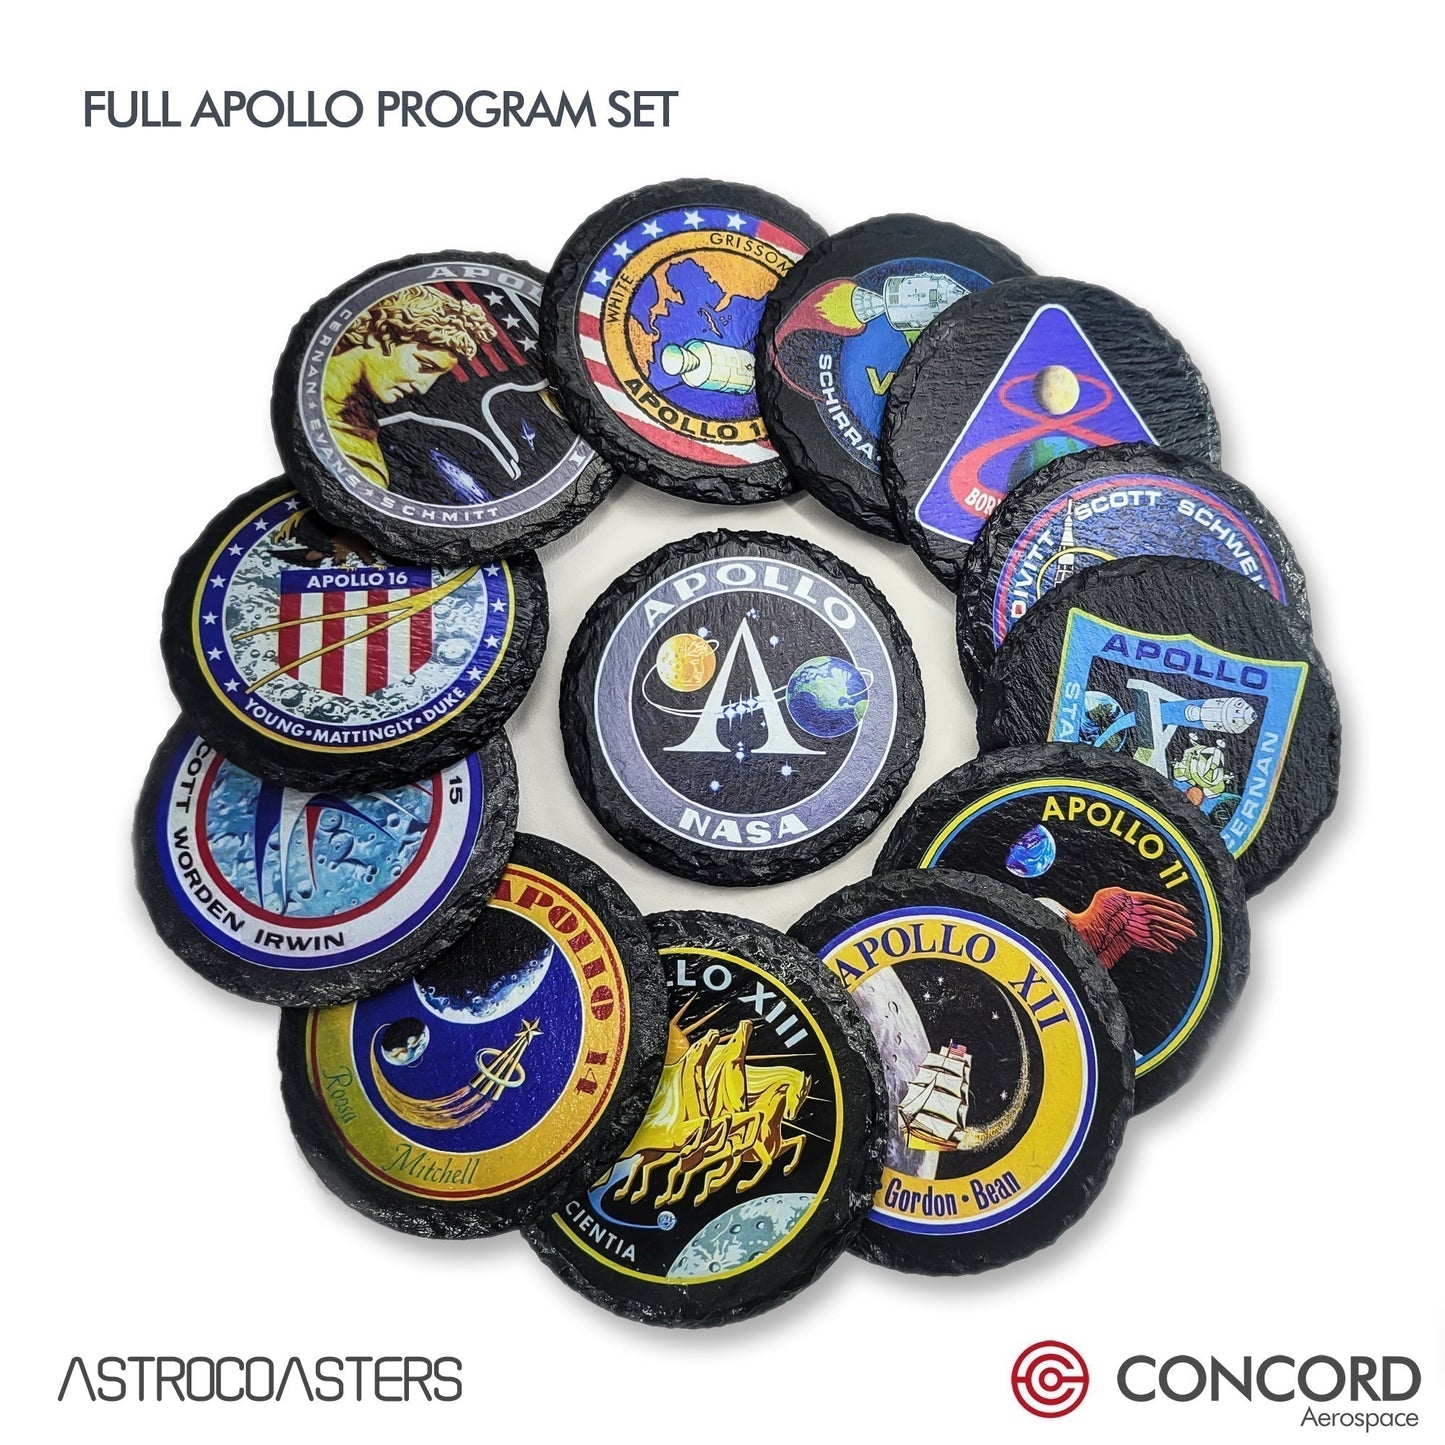 STS - 9 SPACE SHUTTLE - SLATE COASTER - Concord Aerospace Concord Aerospace Concord Aerospace Coasters